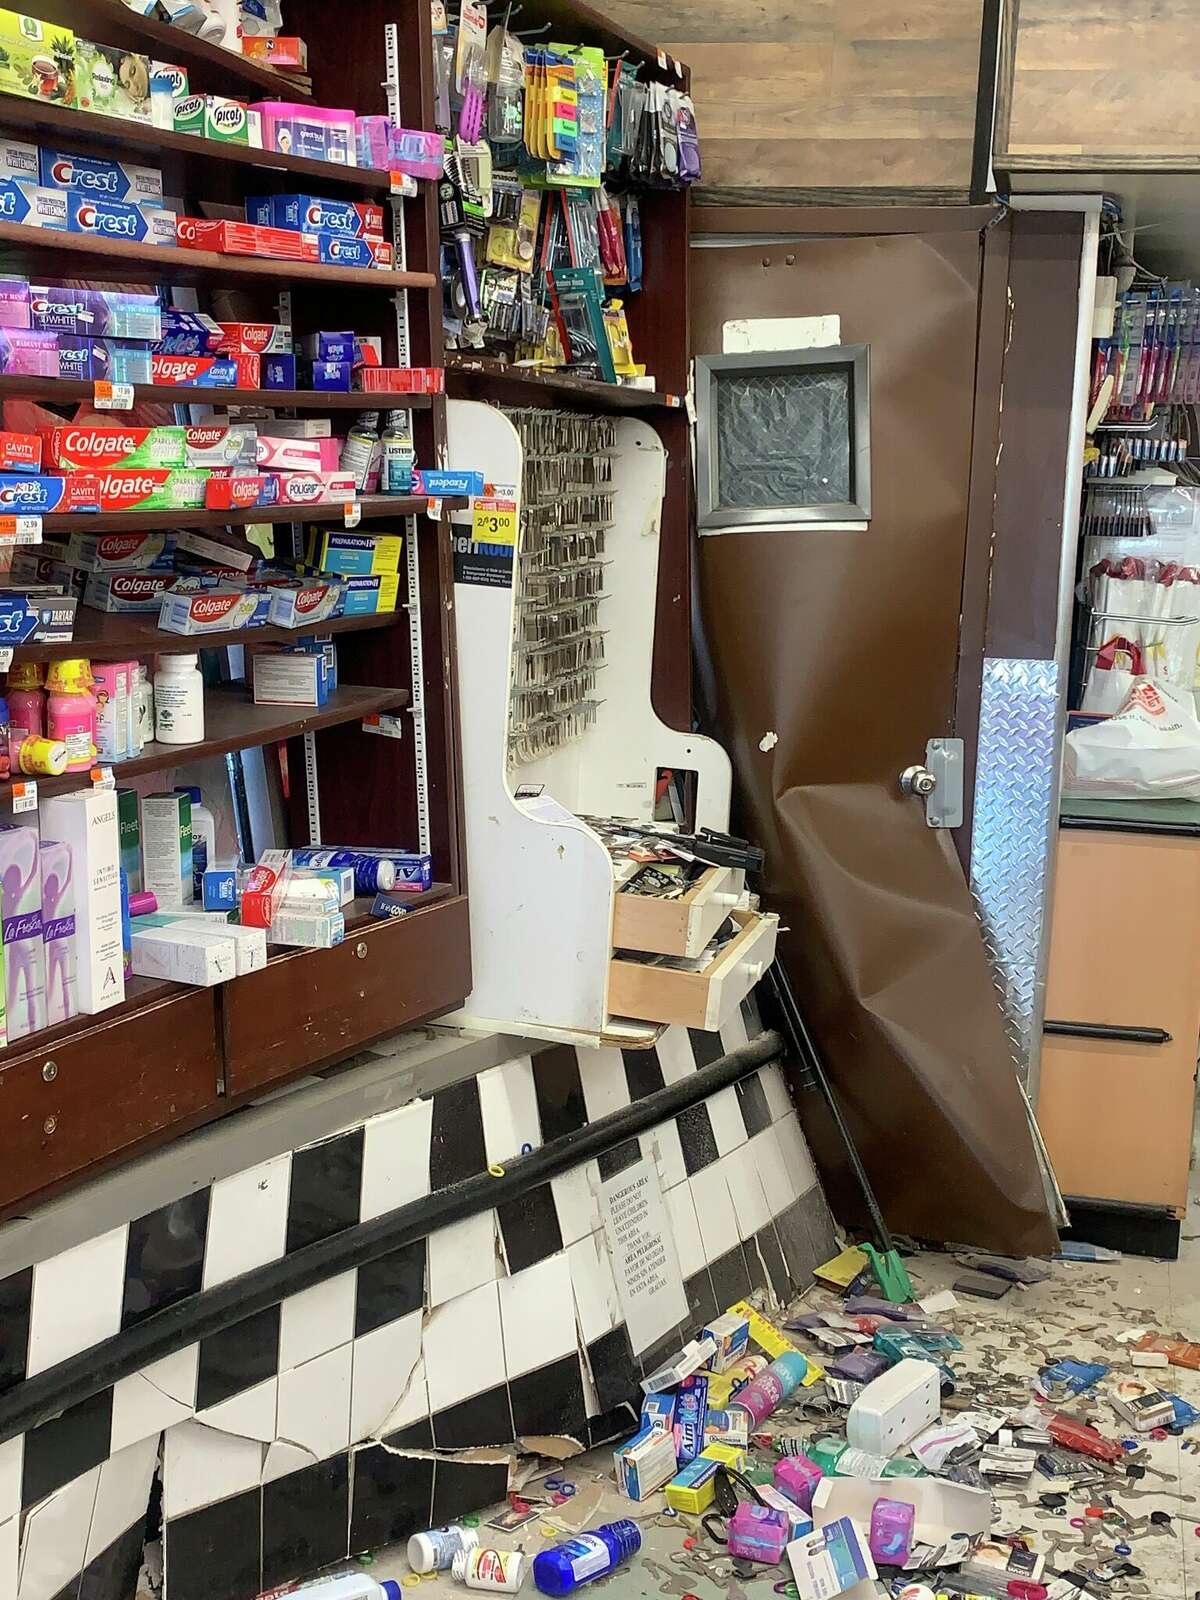 A vehicle rammed into a CTown Supermarket on Greenwich Avenue Monday, injuring the driver, a store employee and a customer, New Haven authorities said. 